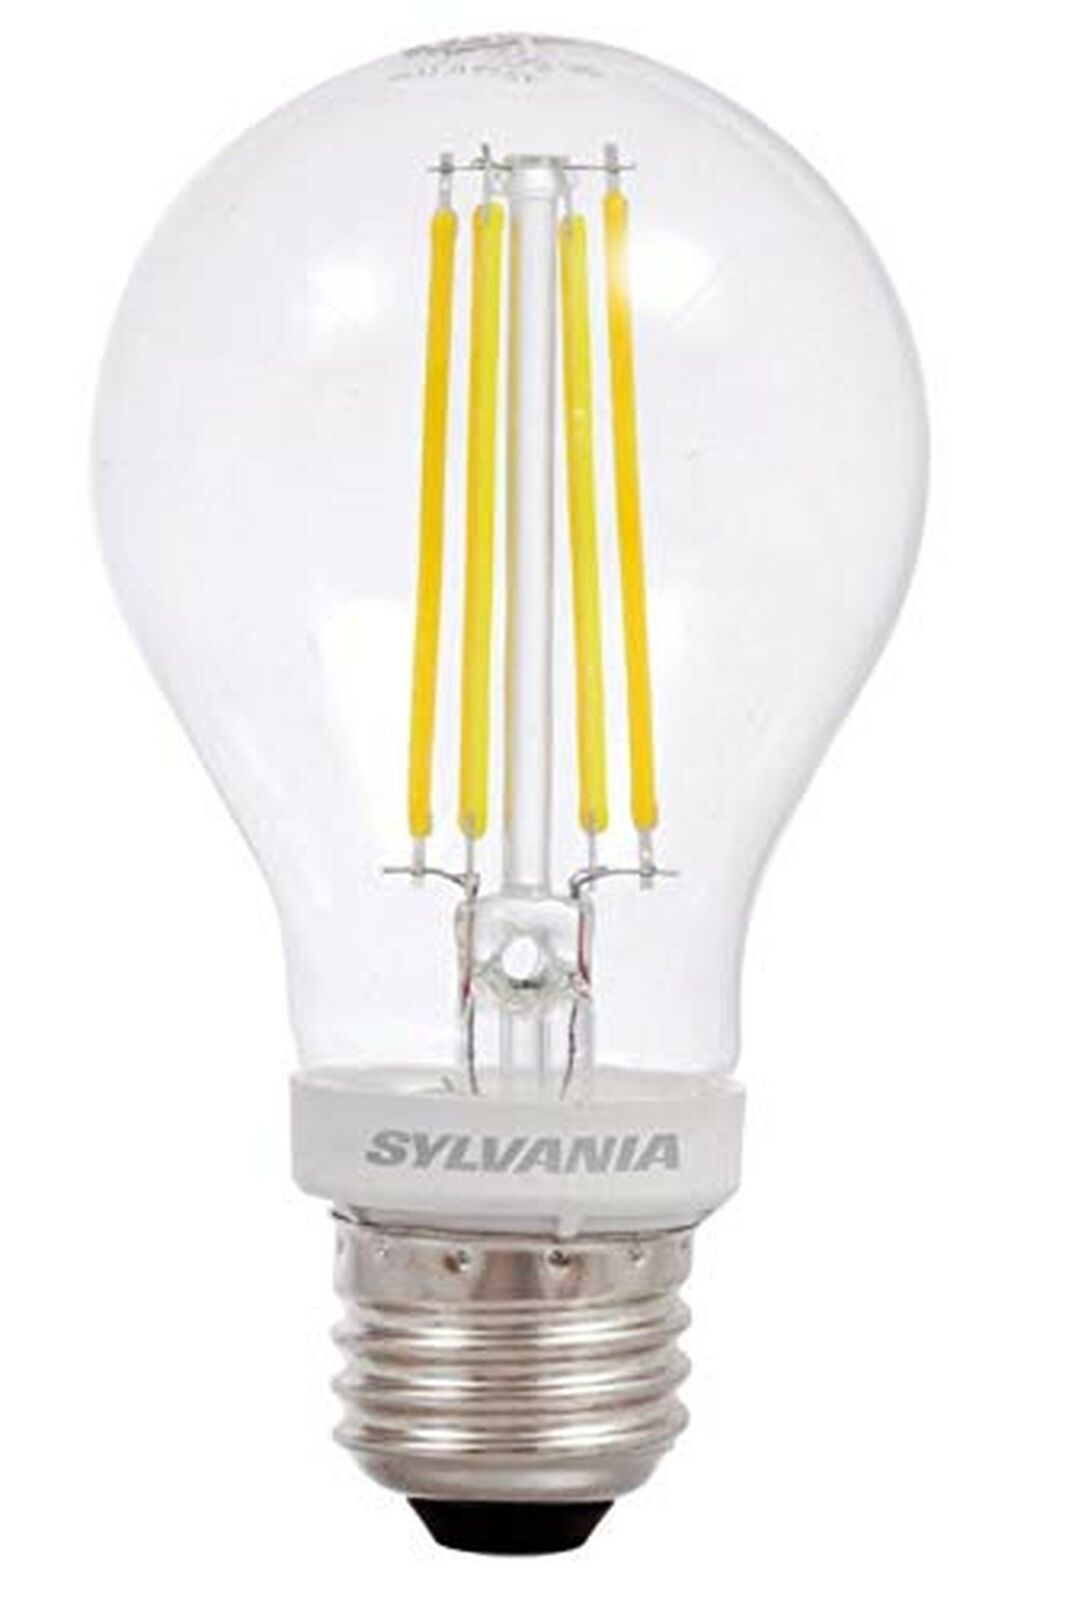 SYLVANIA Lighting, Daylight 40297 Sylvania 60 Watt Equivalent, A19 LED Light Bulbs, Dimmable, Color 5000K, Made in The USA with US and Global Parts